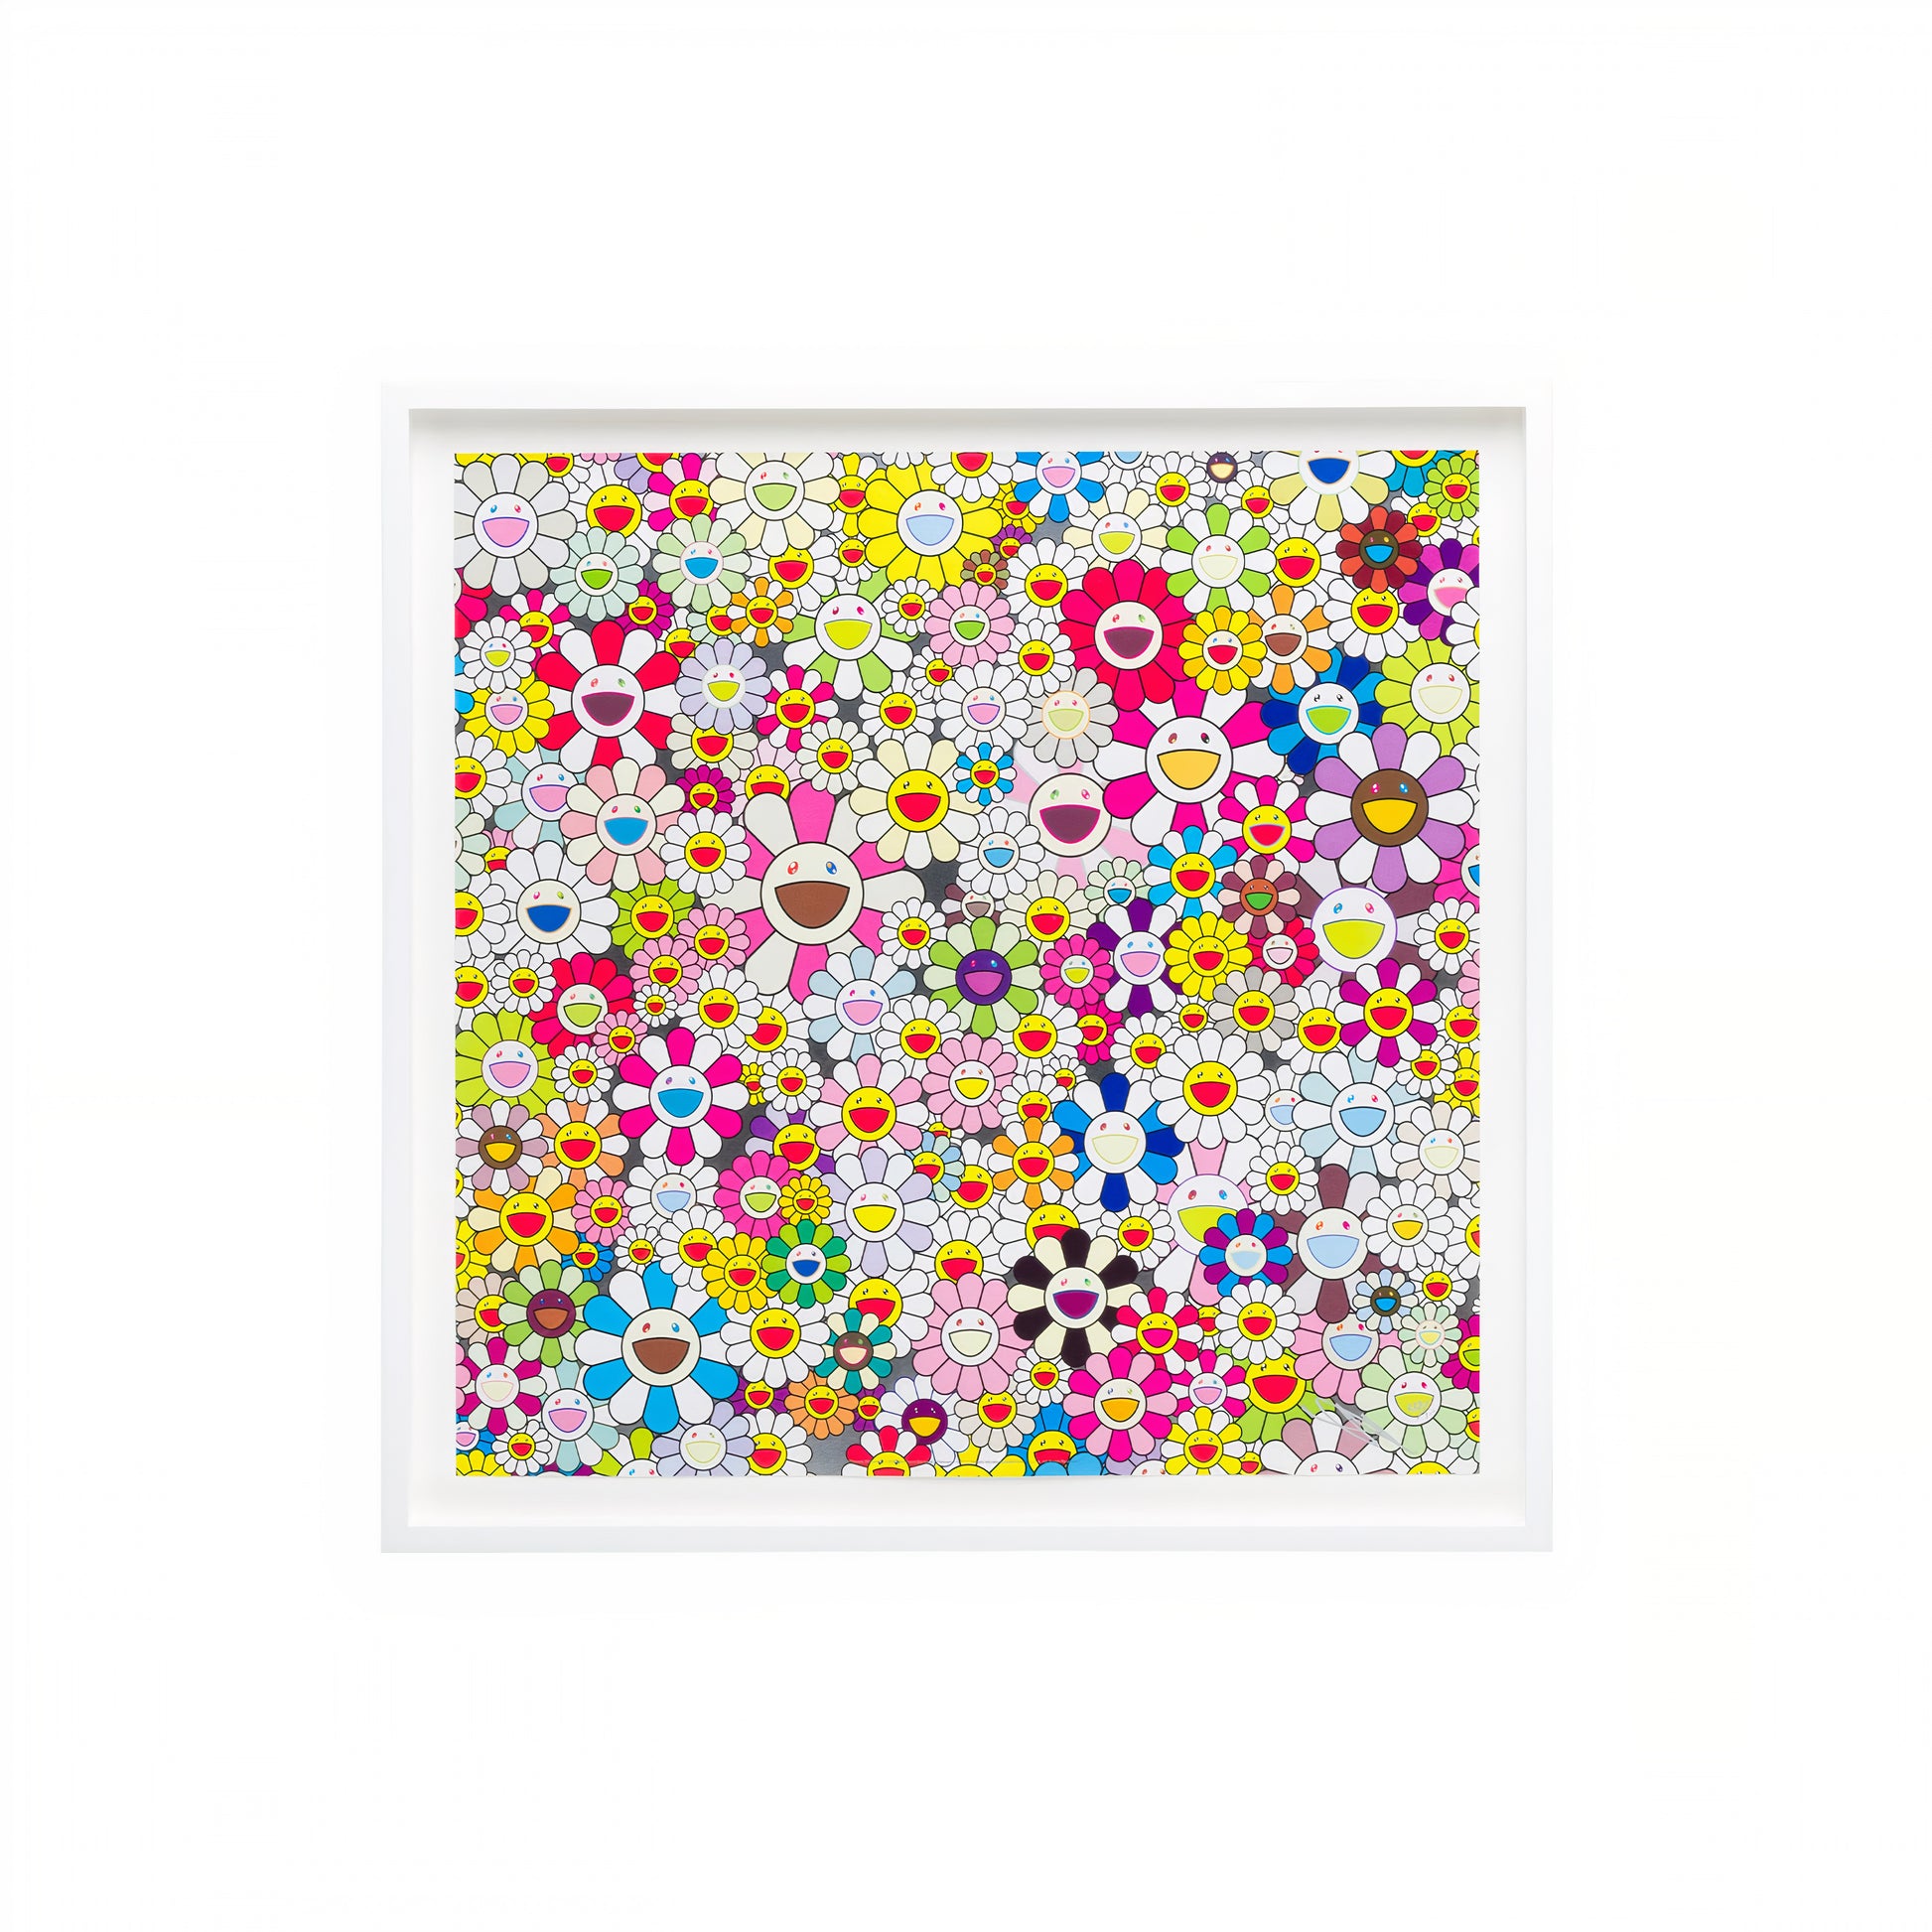 Takashi Murakami Flowers Blooming In The World And The Land Of Nirvana (4), 2013 Offset lithograph on wove paper 19 5/8 × 19 5/8 in (49.8 × 49.8 cm) Edition of 300  Hand Signed + Numbered by the artist